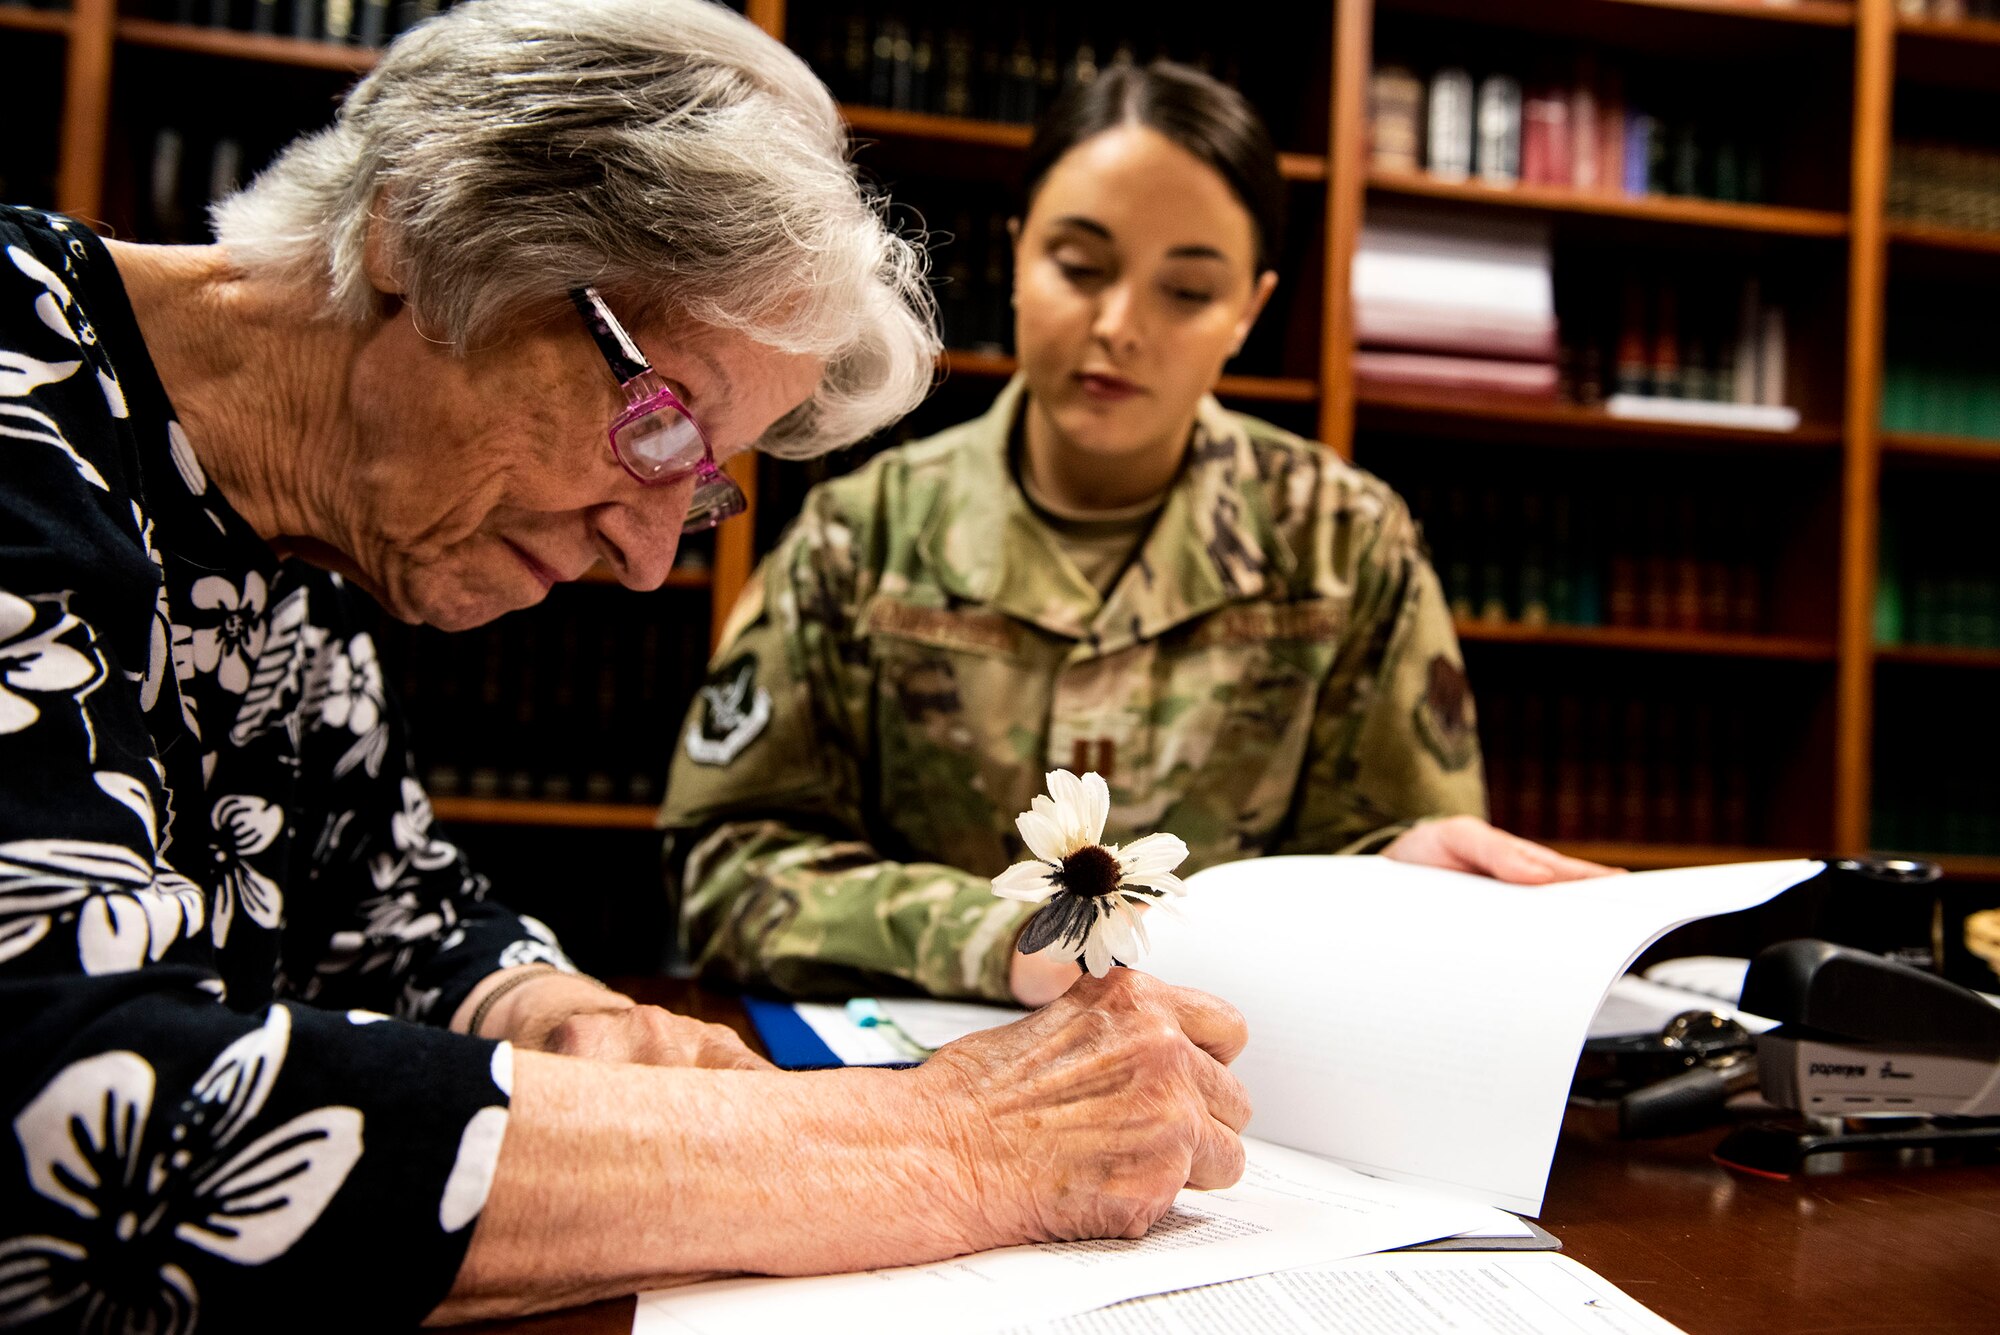 Capt. Katelynn Henderson, right, 23d Wing assistant staff judge advocate (JA), aids Barbara Swindell, retiree spouse, with her will Oct. 8, 2019, at Moody Air Force Base, Ga. JA regularly aids retirees and military members with wills on Tuesdays. This free legal assistance provides personal and financial relief for customers and enables Airman readiness. (U.S. Air Force photo by Senior Airman Erick Requadt)